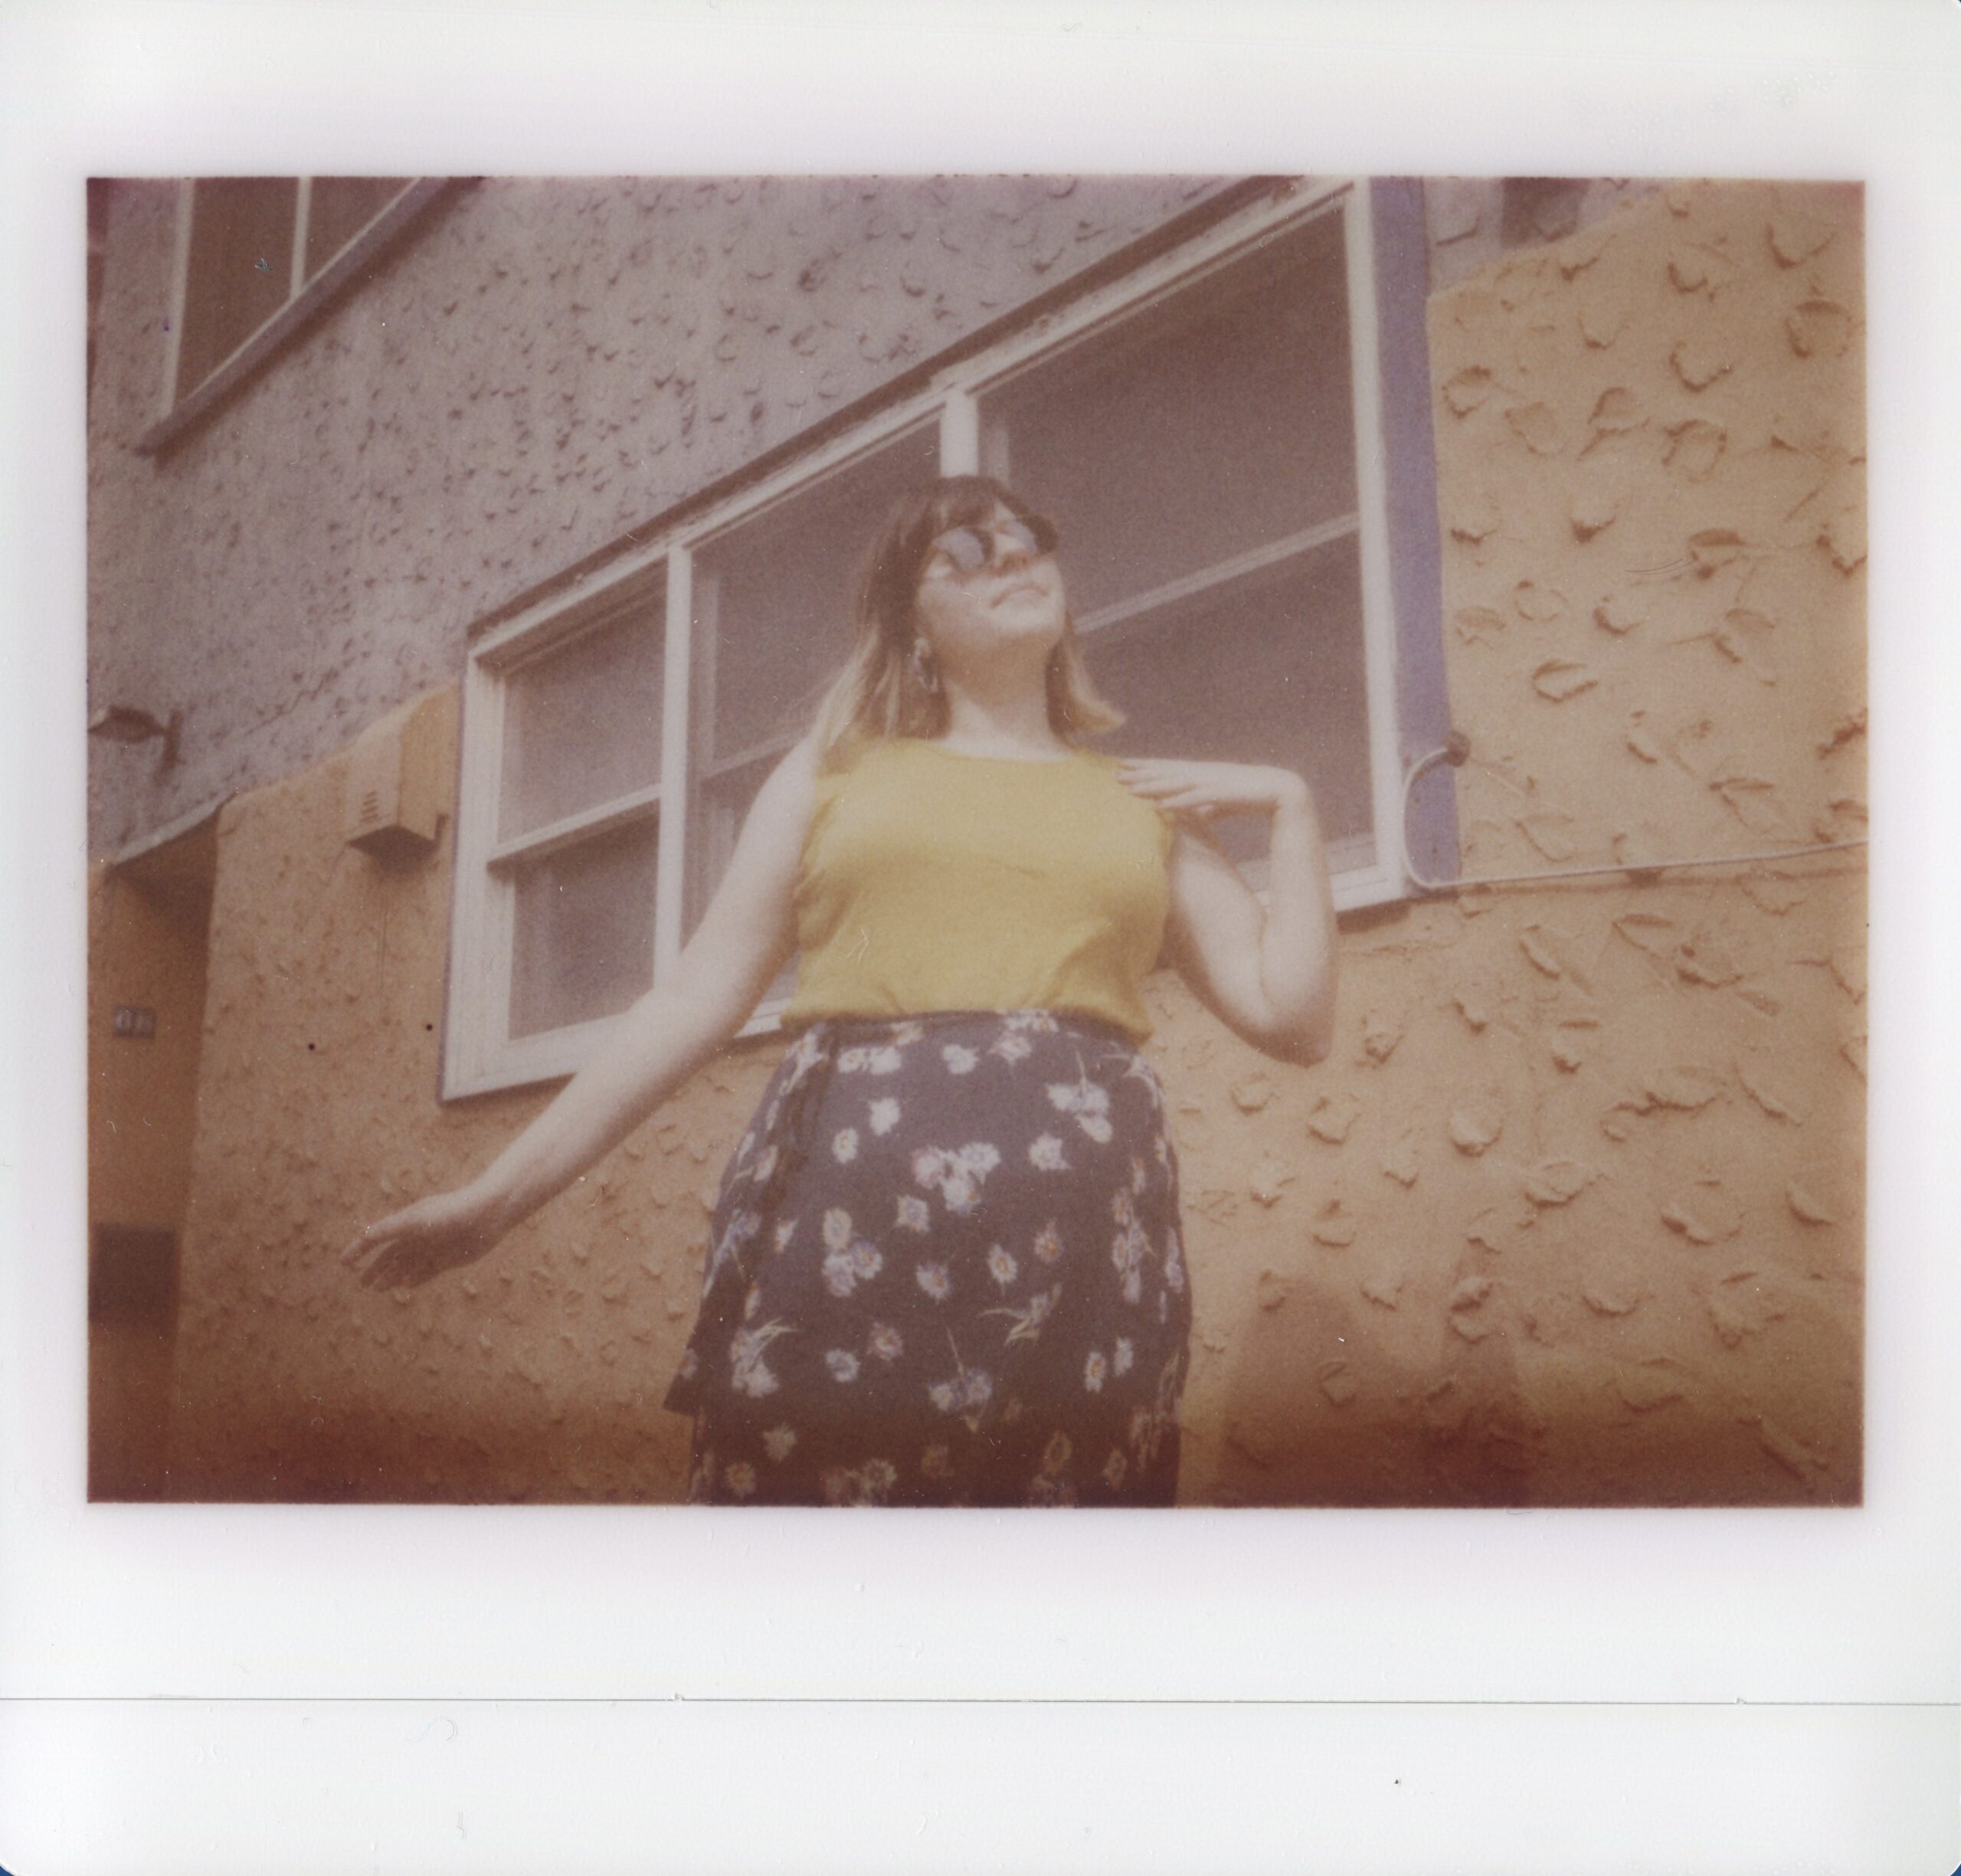 Here’s what it’s like to shoot a rare extinct instant film